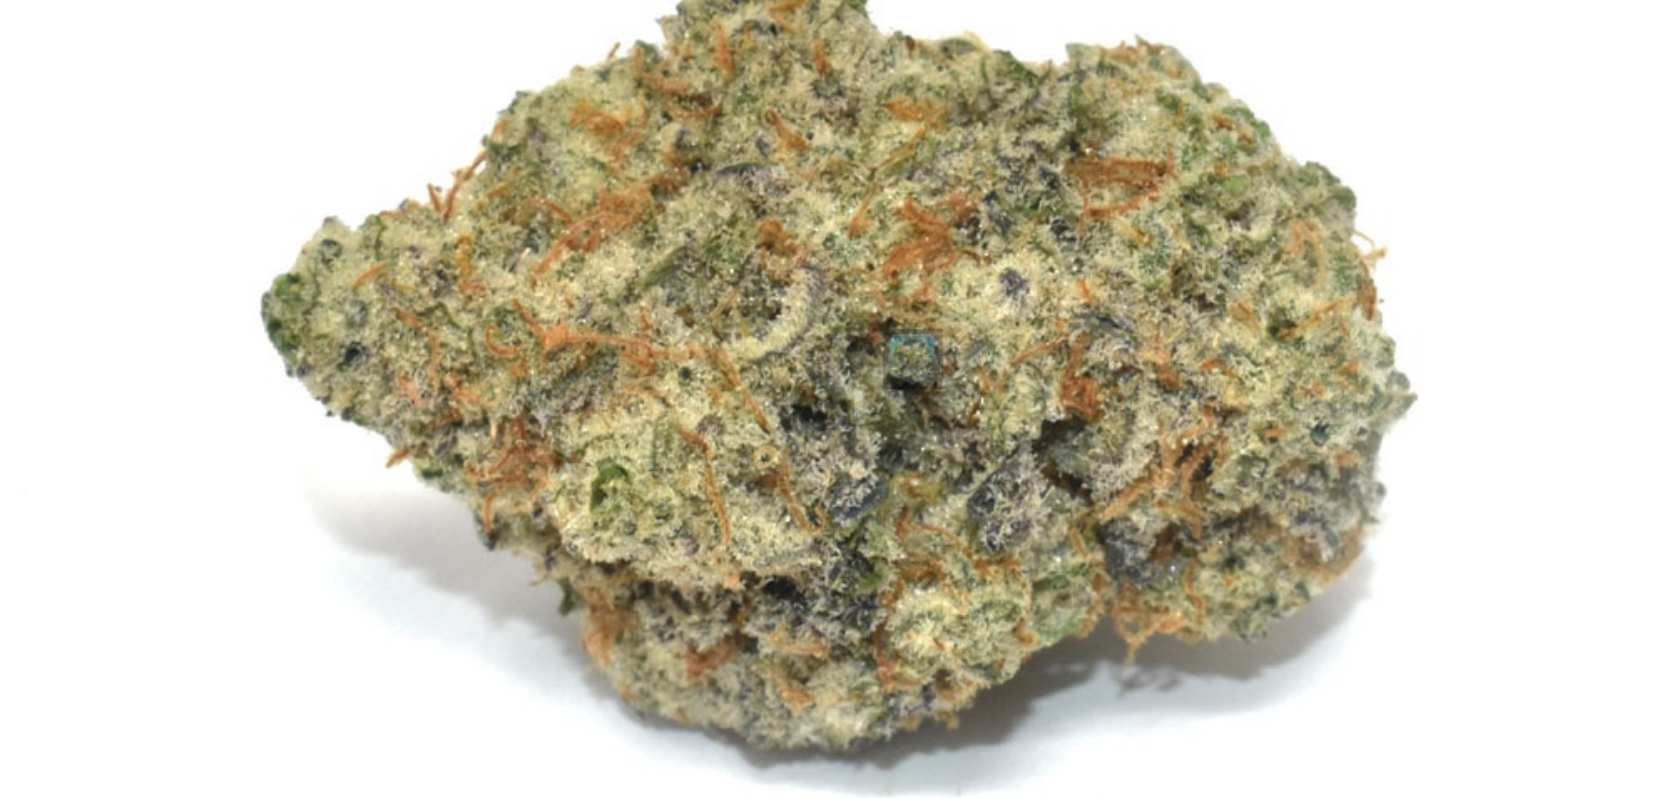 Looking for a 50/50 hybrid that packs a potent punch? Say hello to McFlurry! 